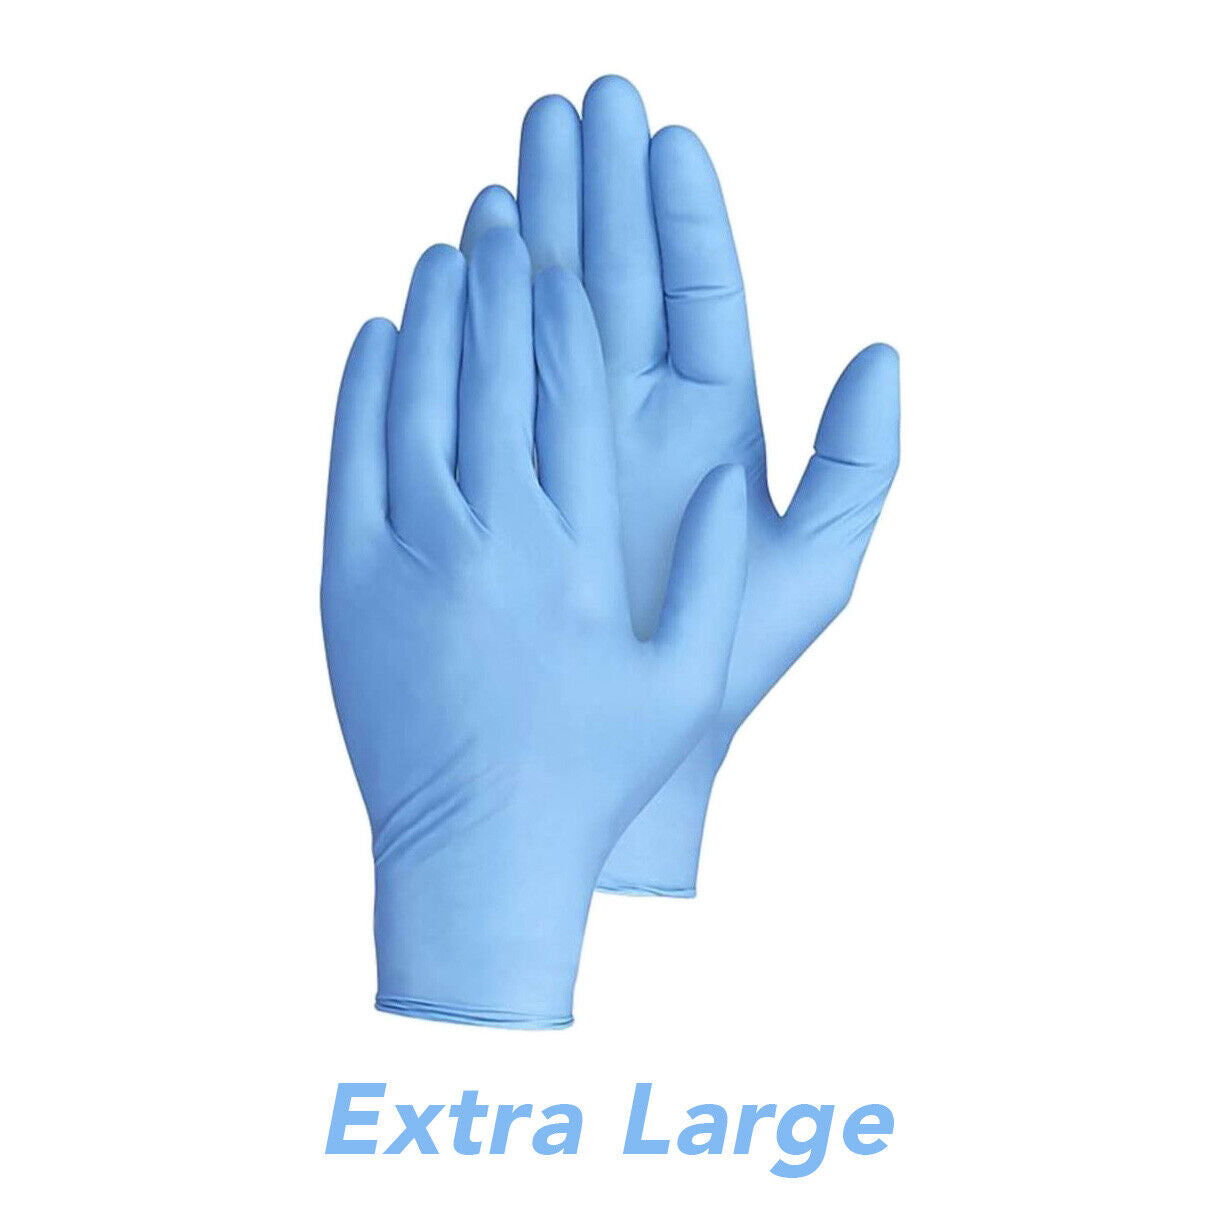 200 Disposable Nitrile Gloves Latex Free S, M, L, XL (Damaged Boxes)